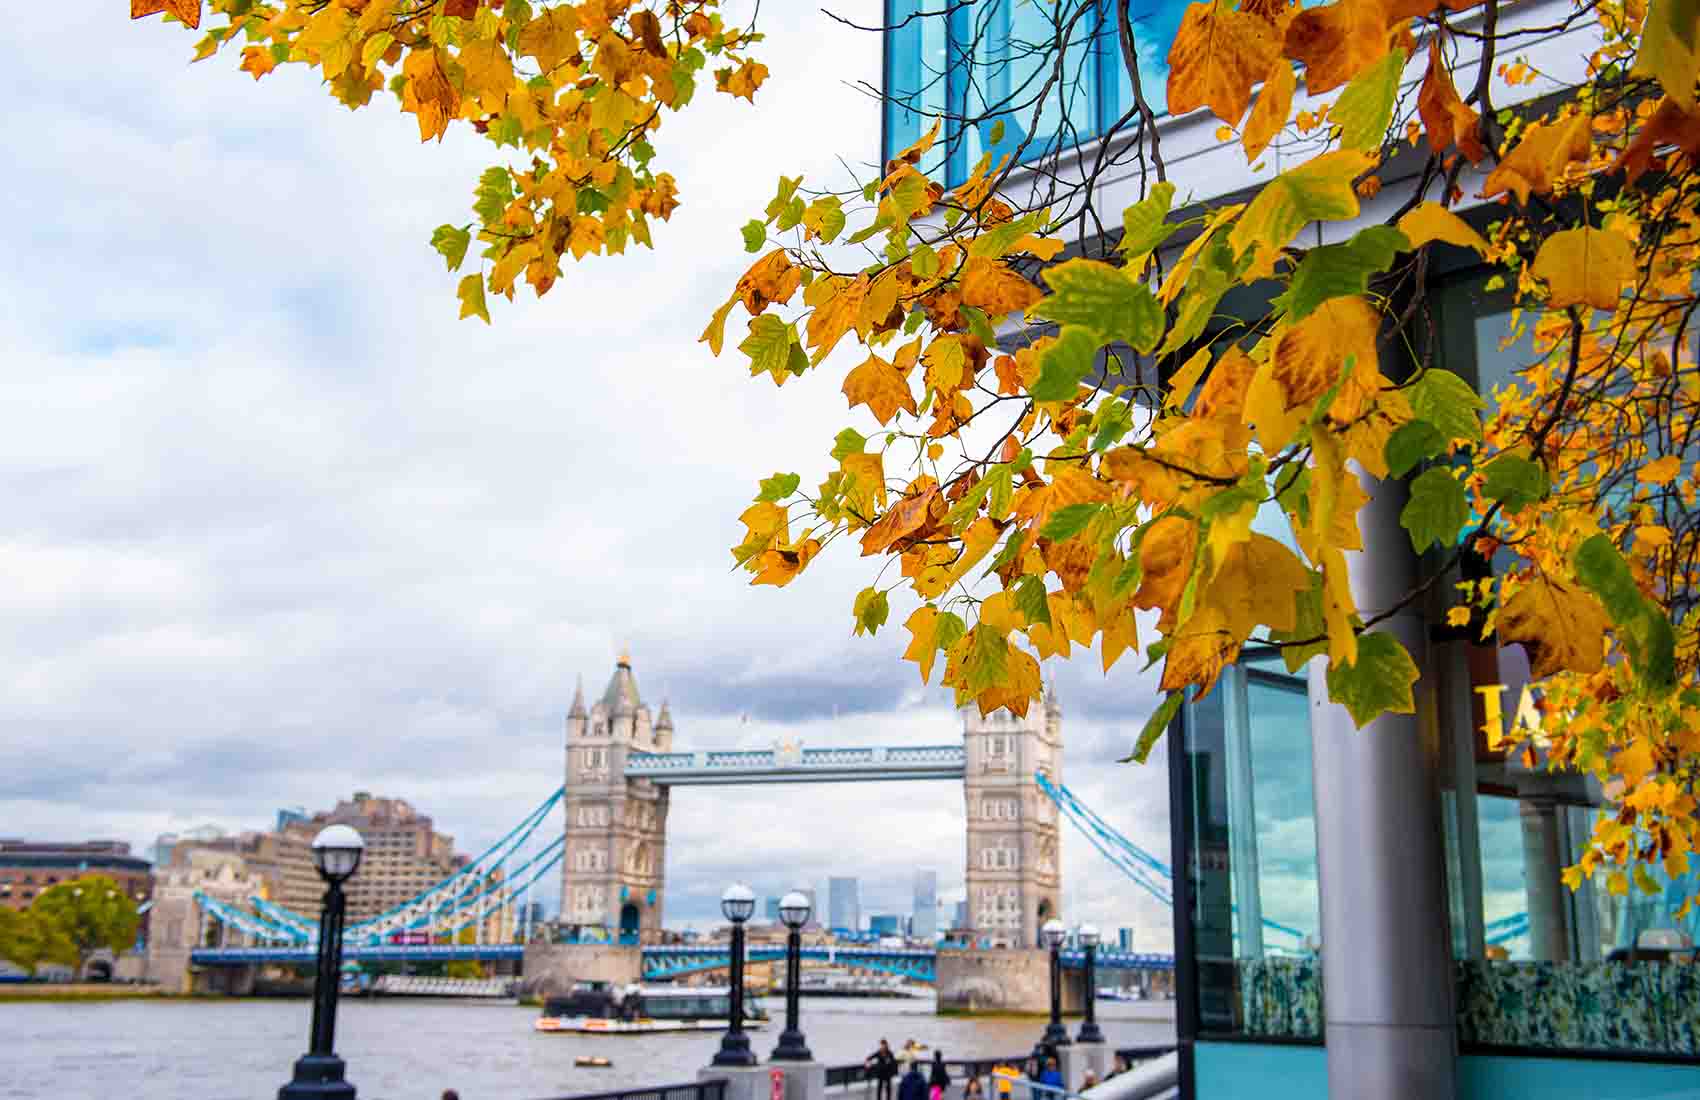 Visiting London in October? Here is a summary of what's on in London in October to get you ready for your holiday. Check out the things to do, weather and tips.